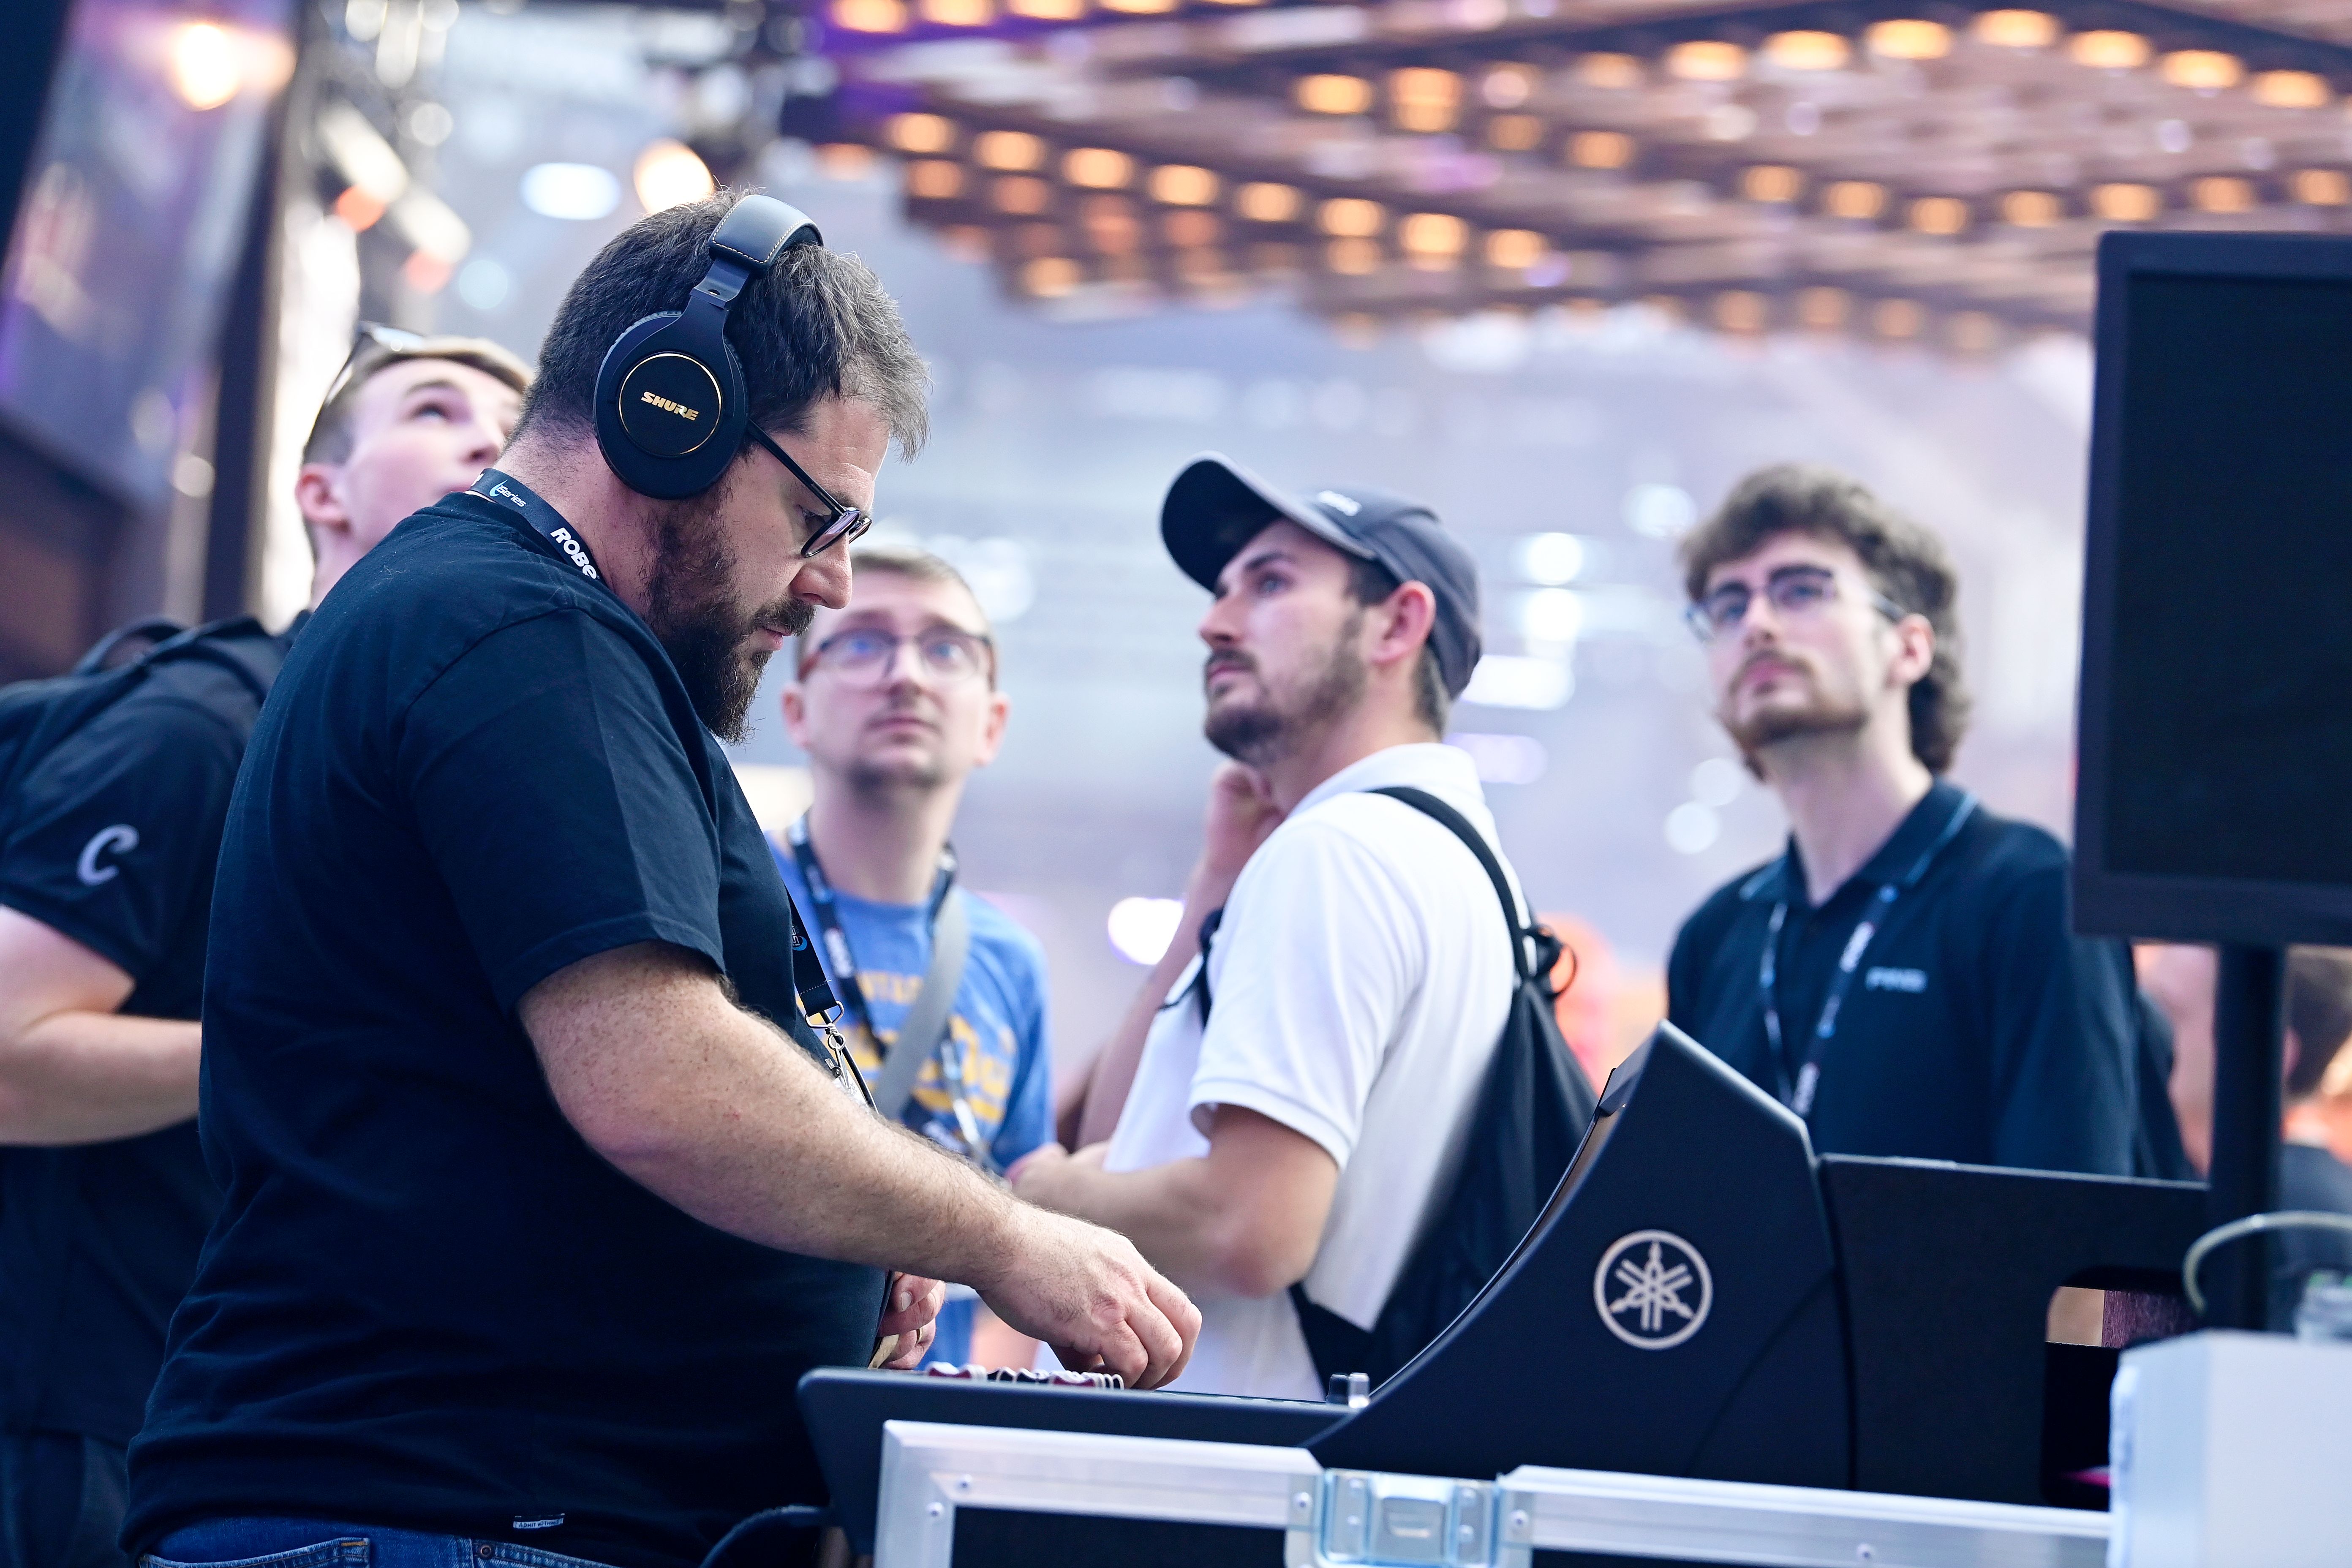 man interacting with sound desk wearing shure headphones at plasa show